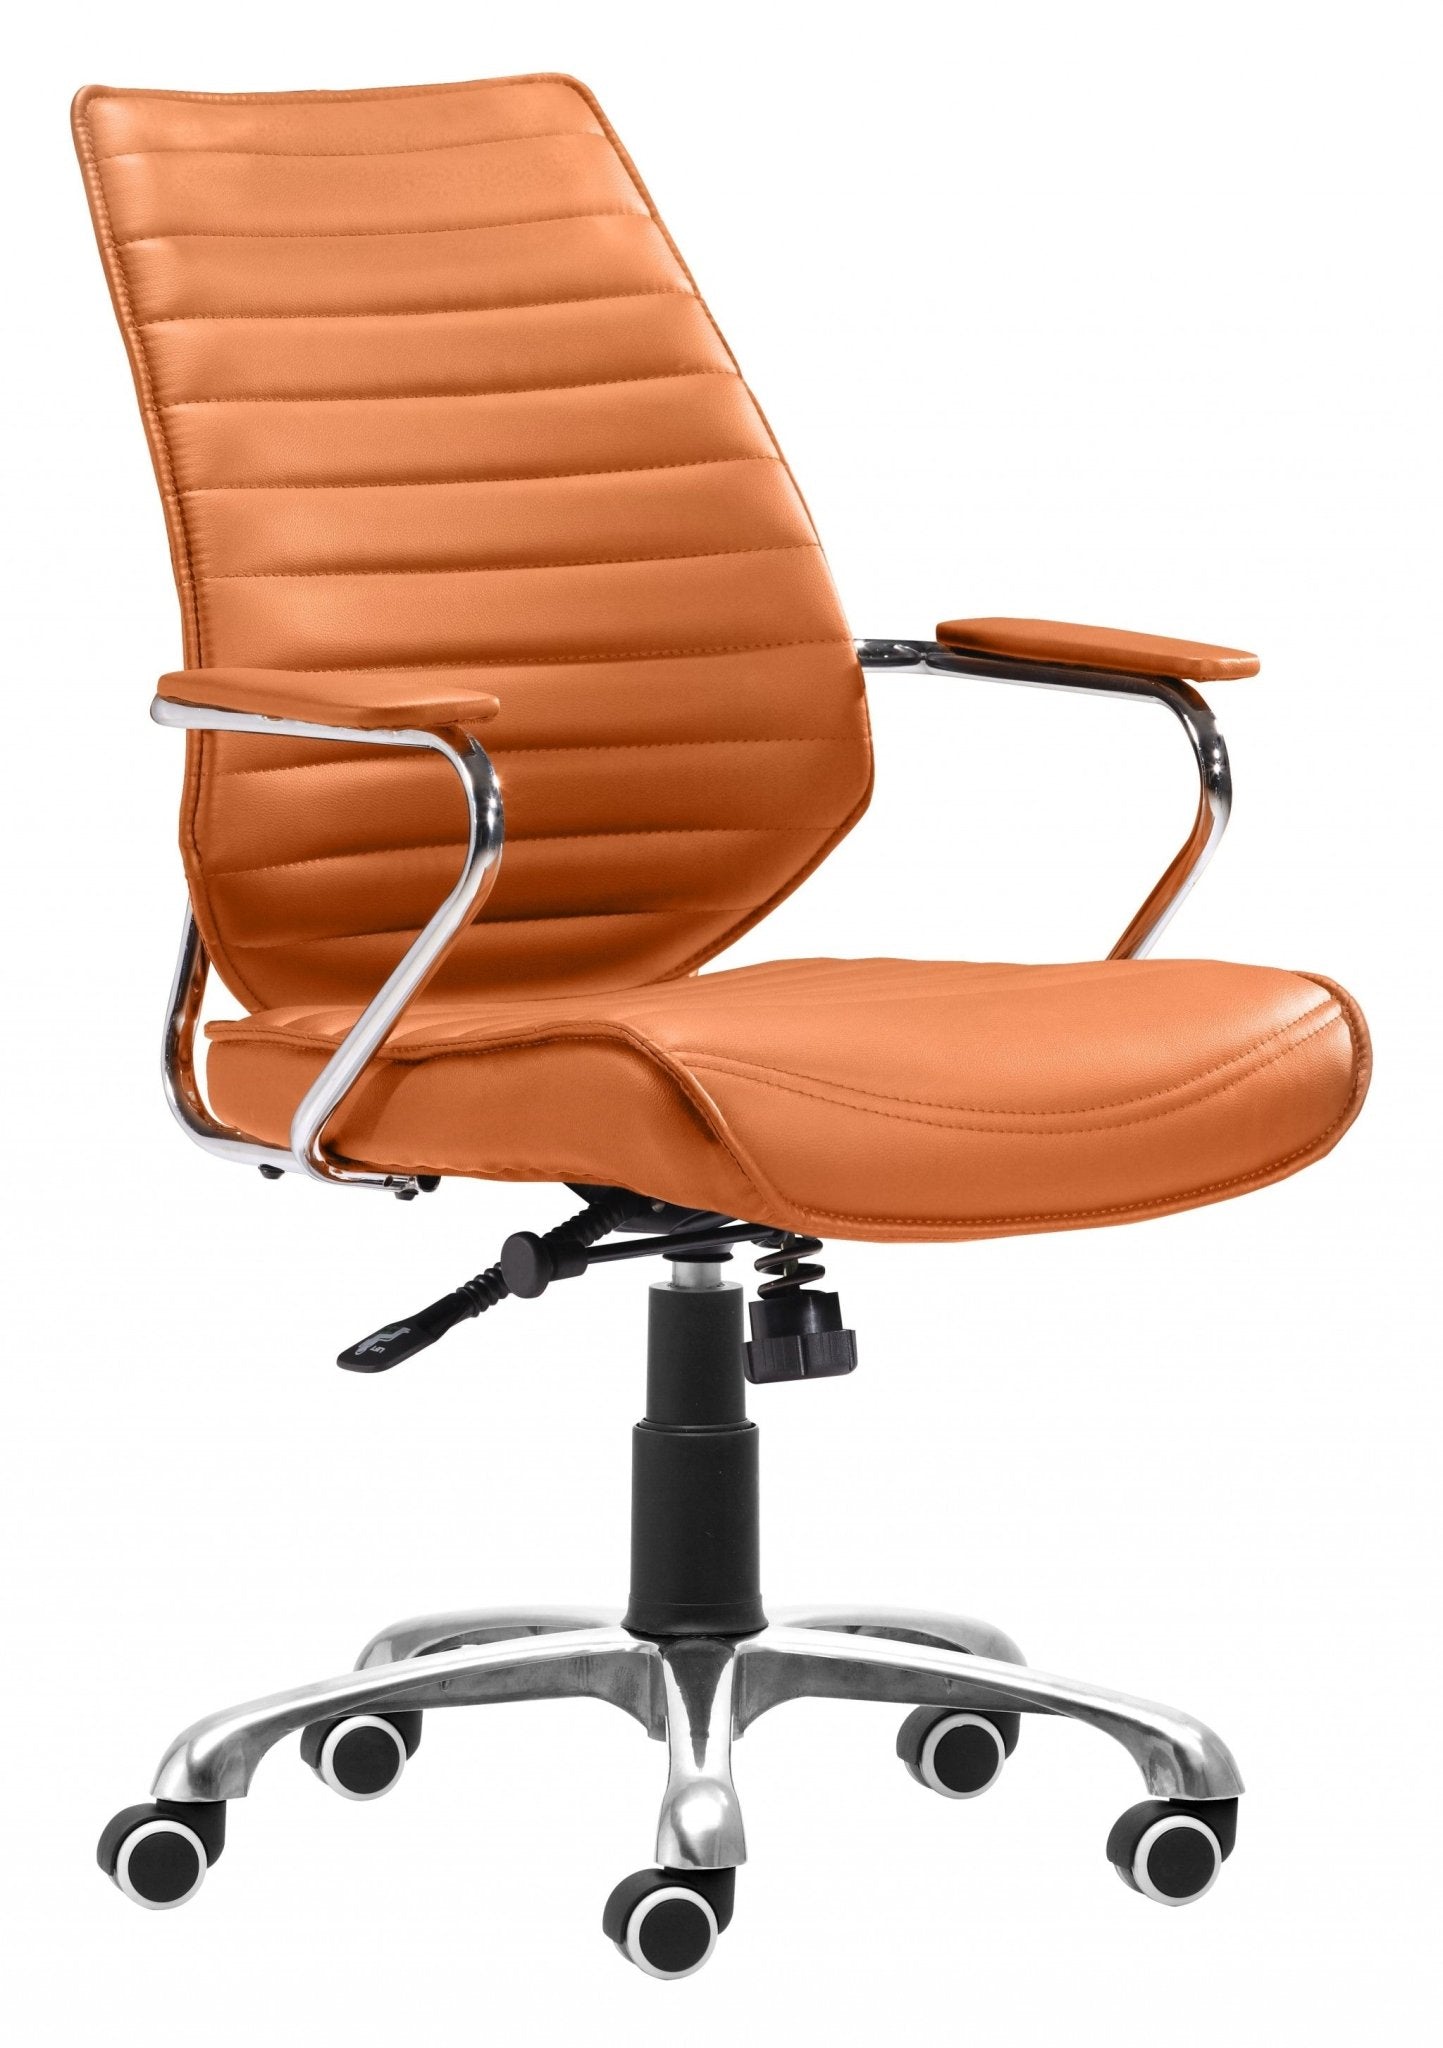 Orange-and-Silver-Adjustable-Swivel-Metal-Rolling-Executive-Office-Chair-Office-Chairs